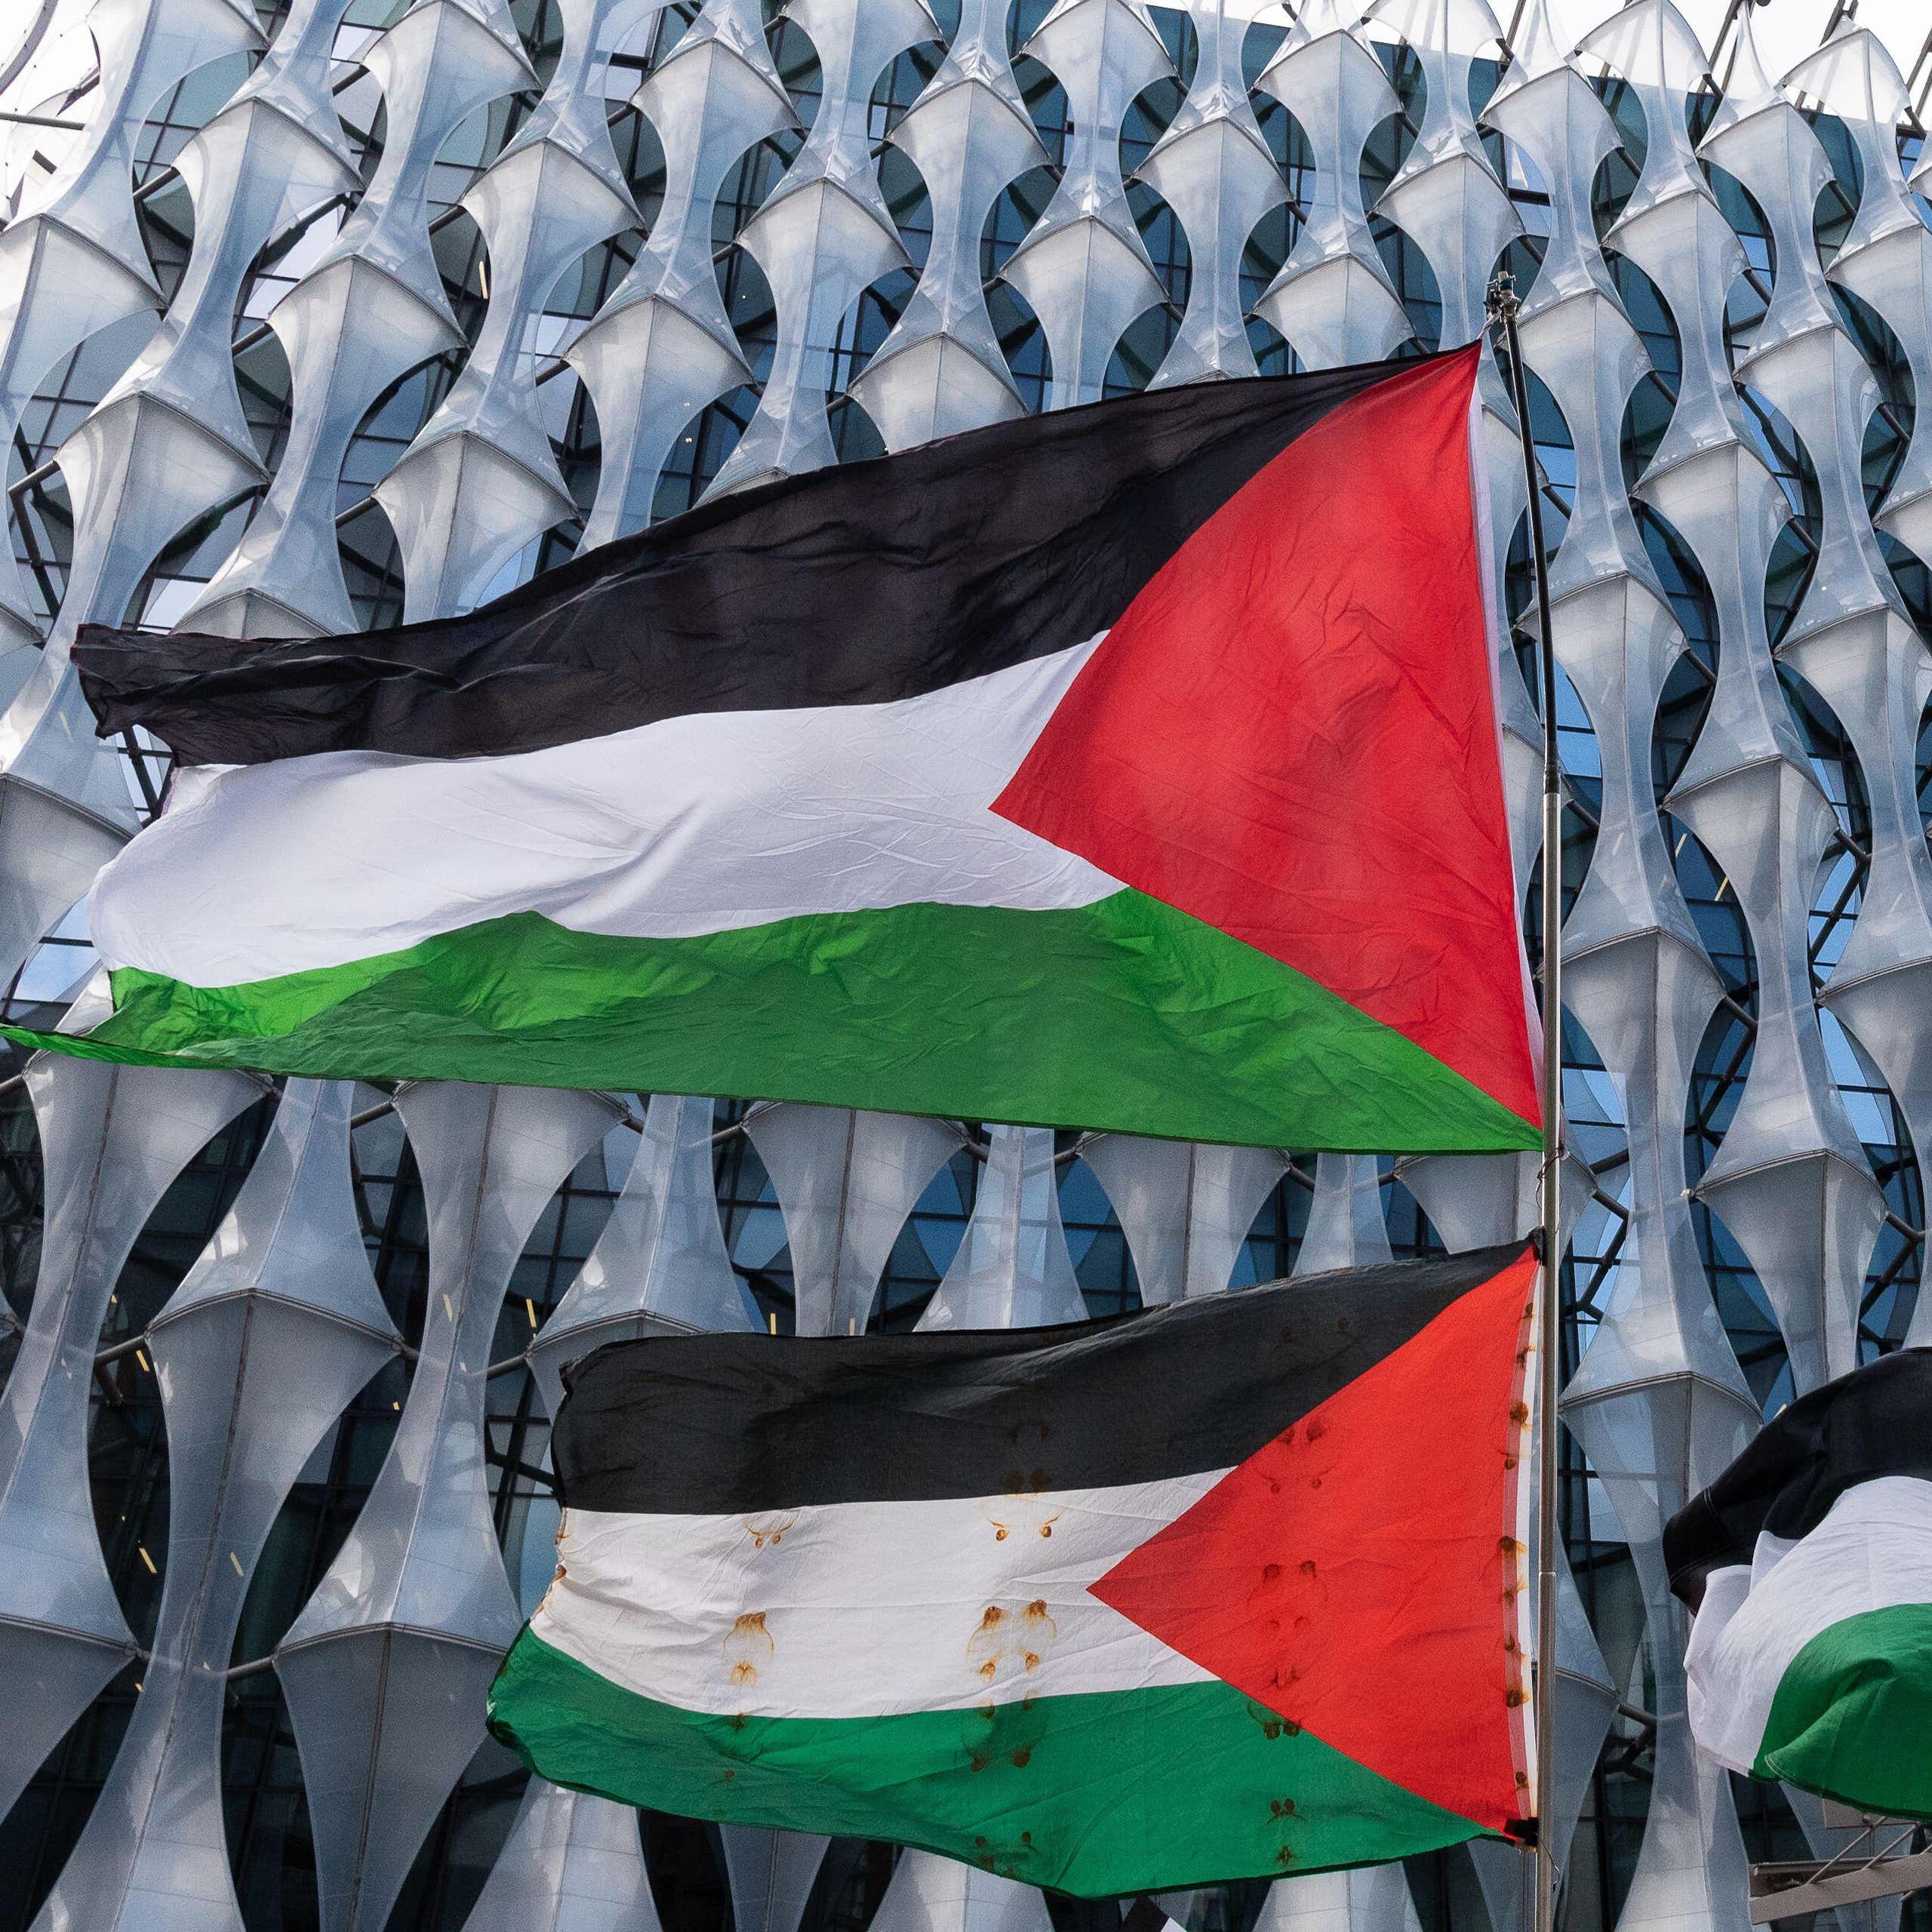 Palestinian flags outside the US embassy in London.